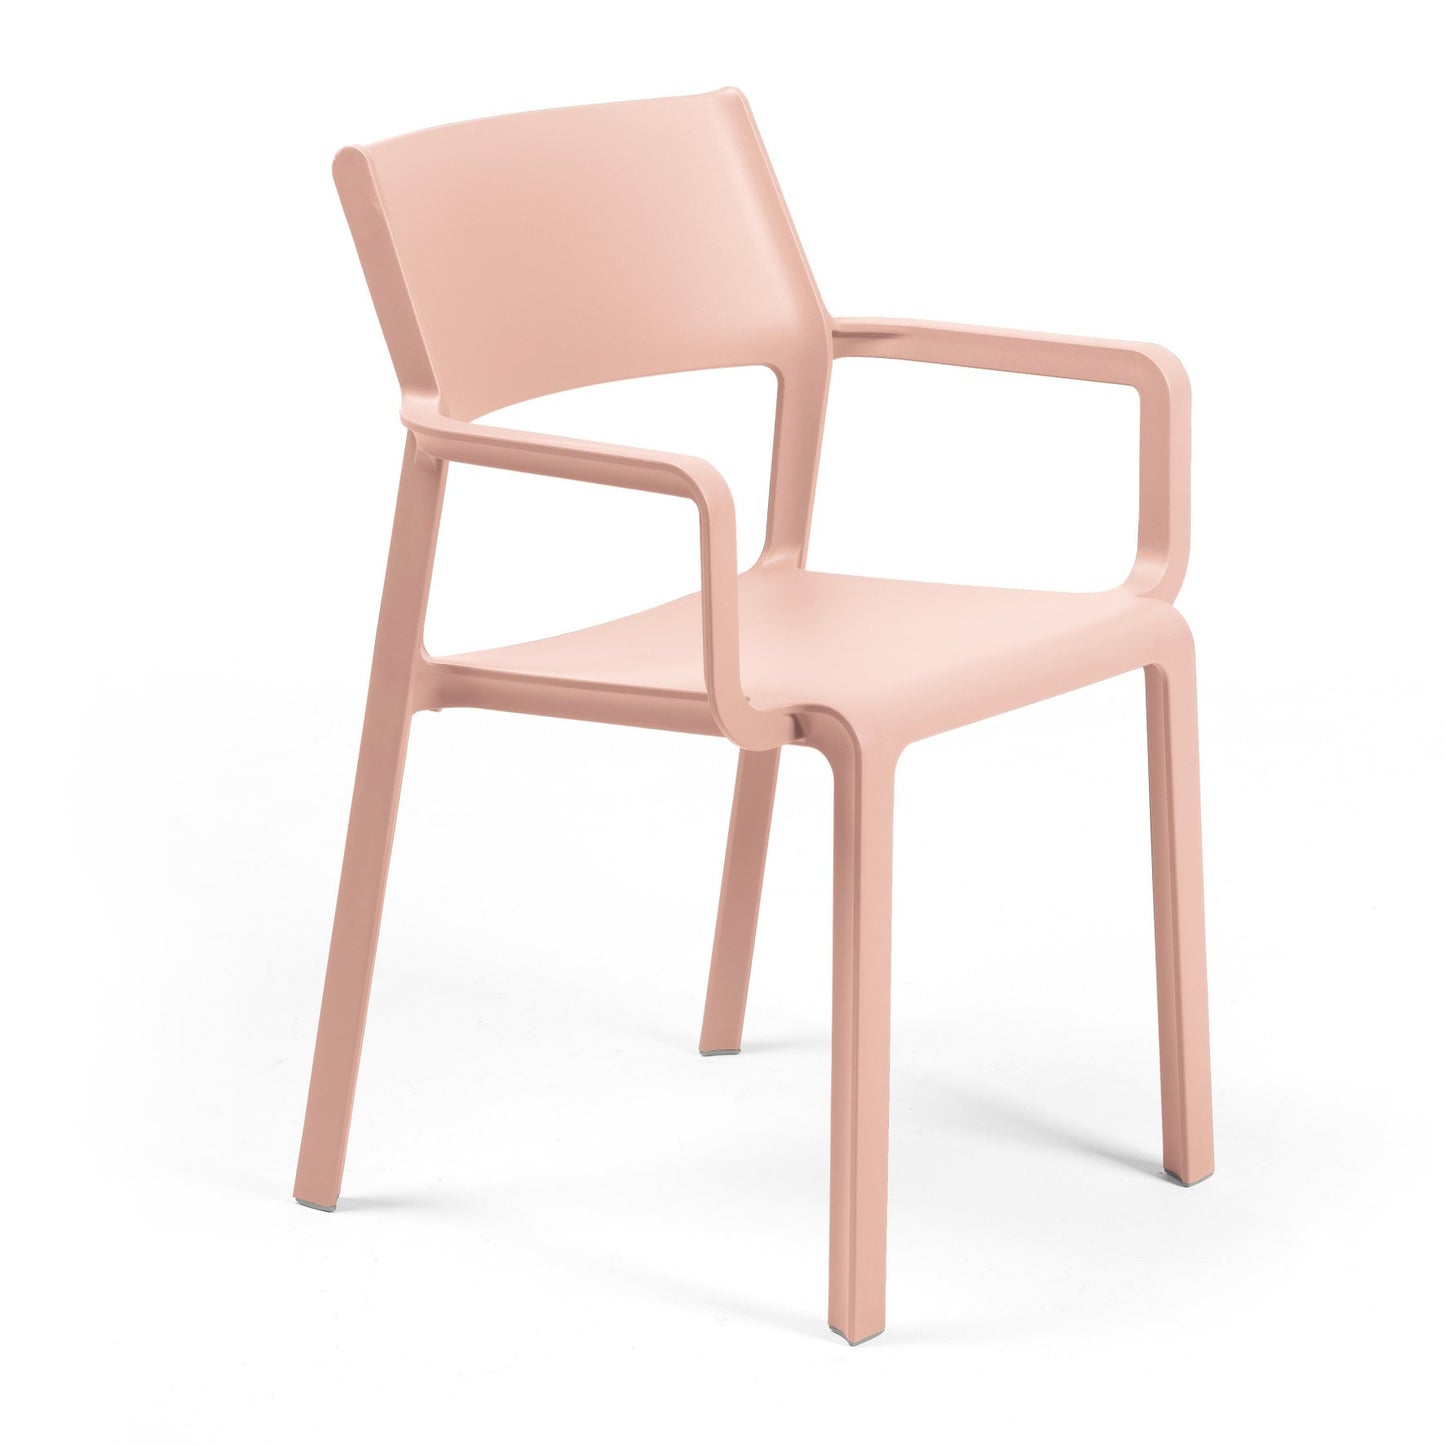 Nardi Trill Outdoor Armchair in Pink